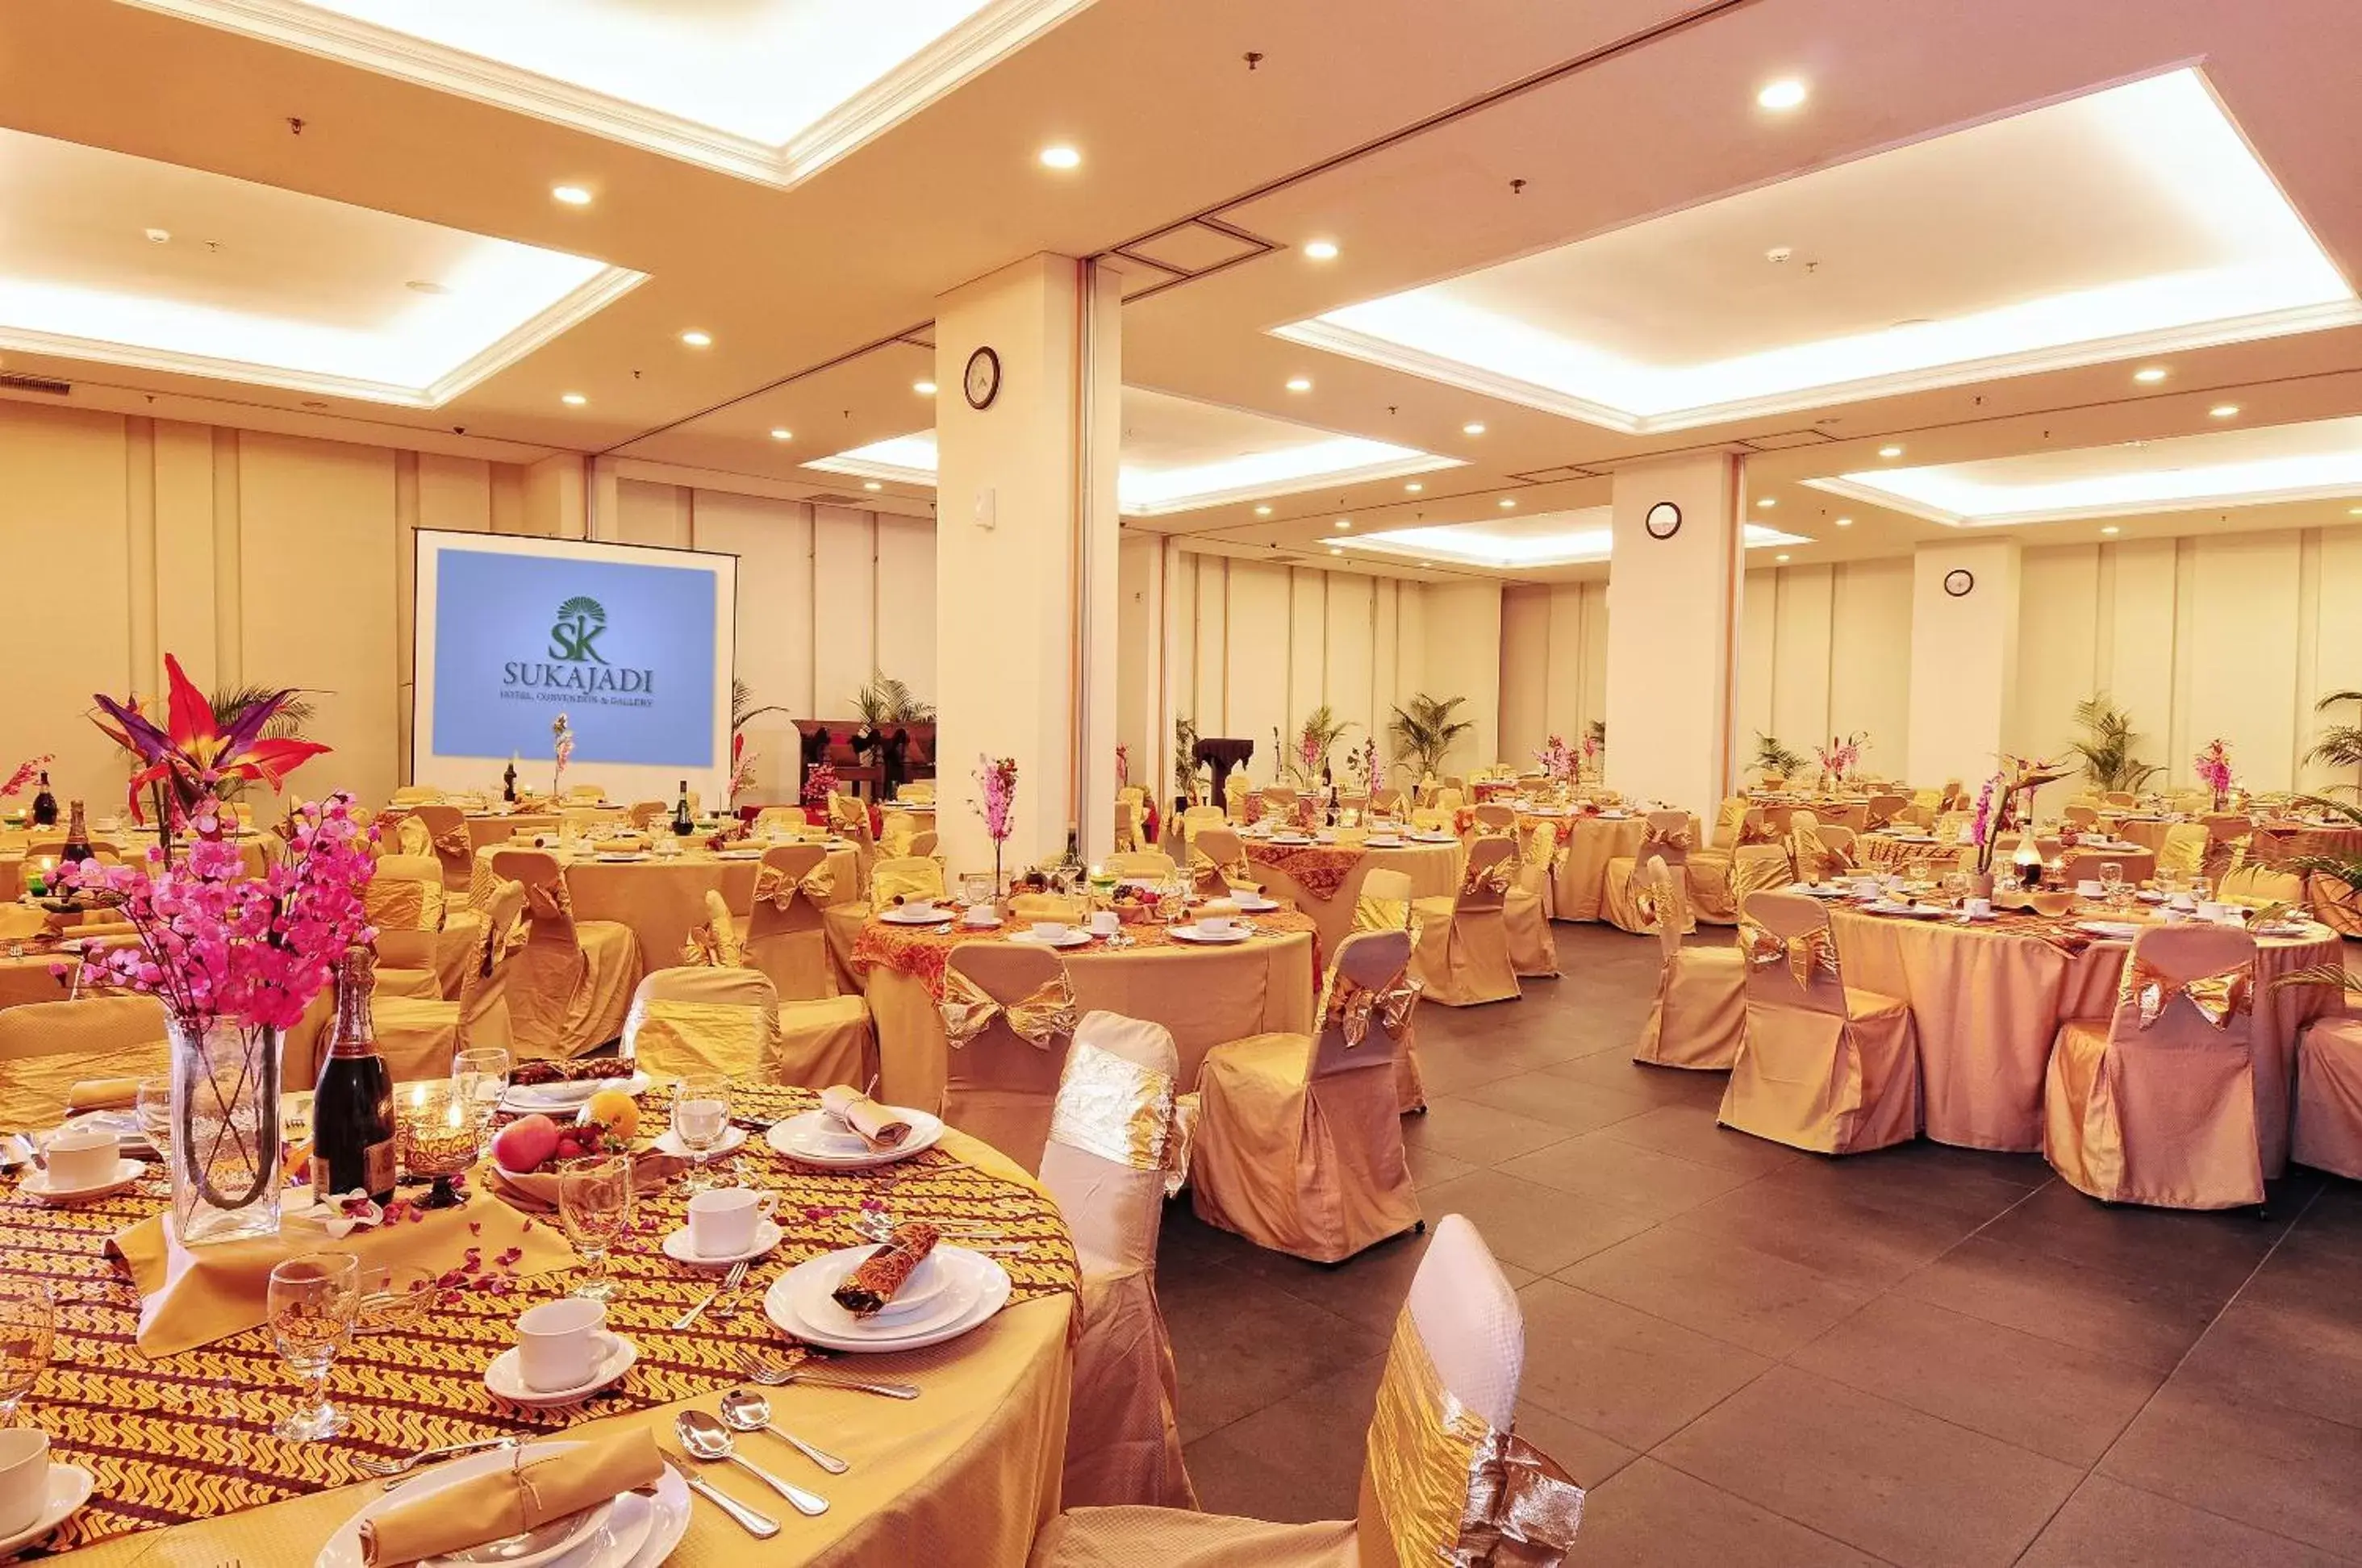 Restaurant/places to eat, Banquet Facilities in Sukajadi Hotel, Convention and Gallery